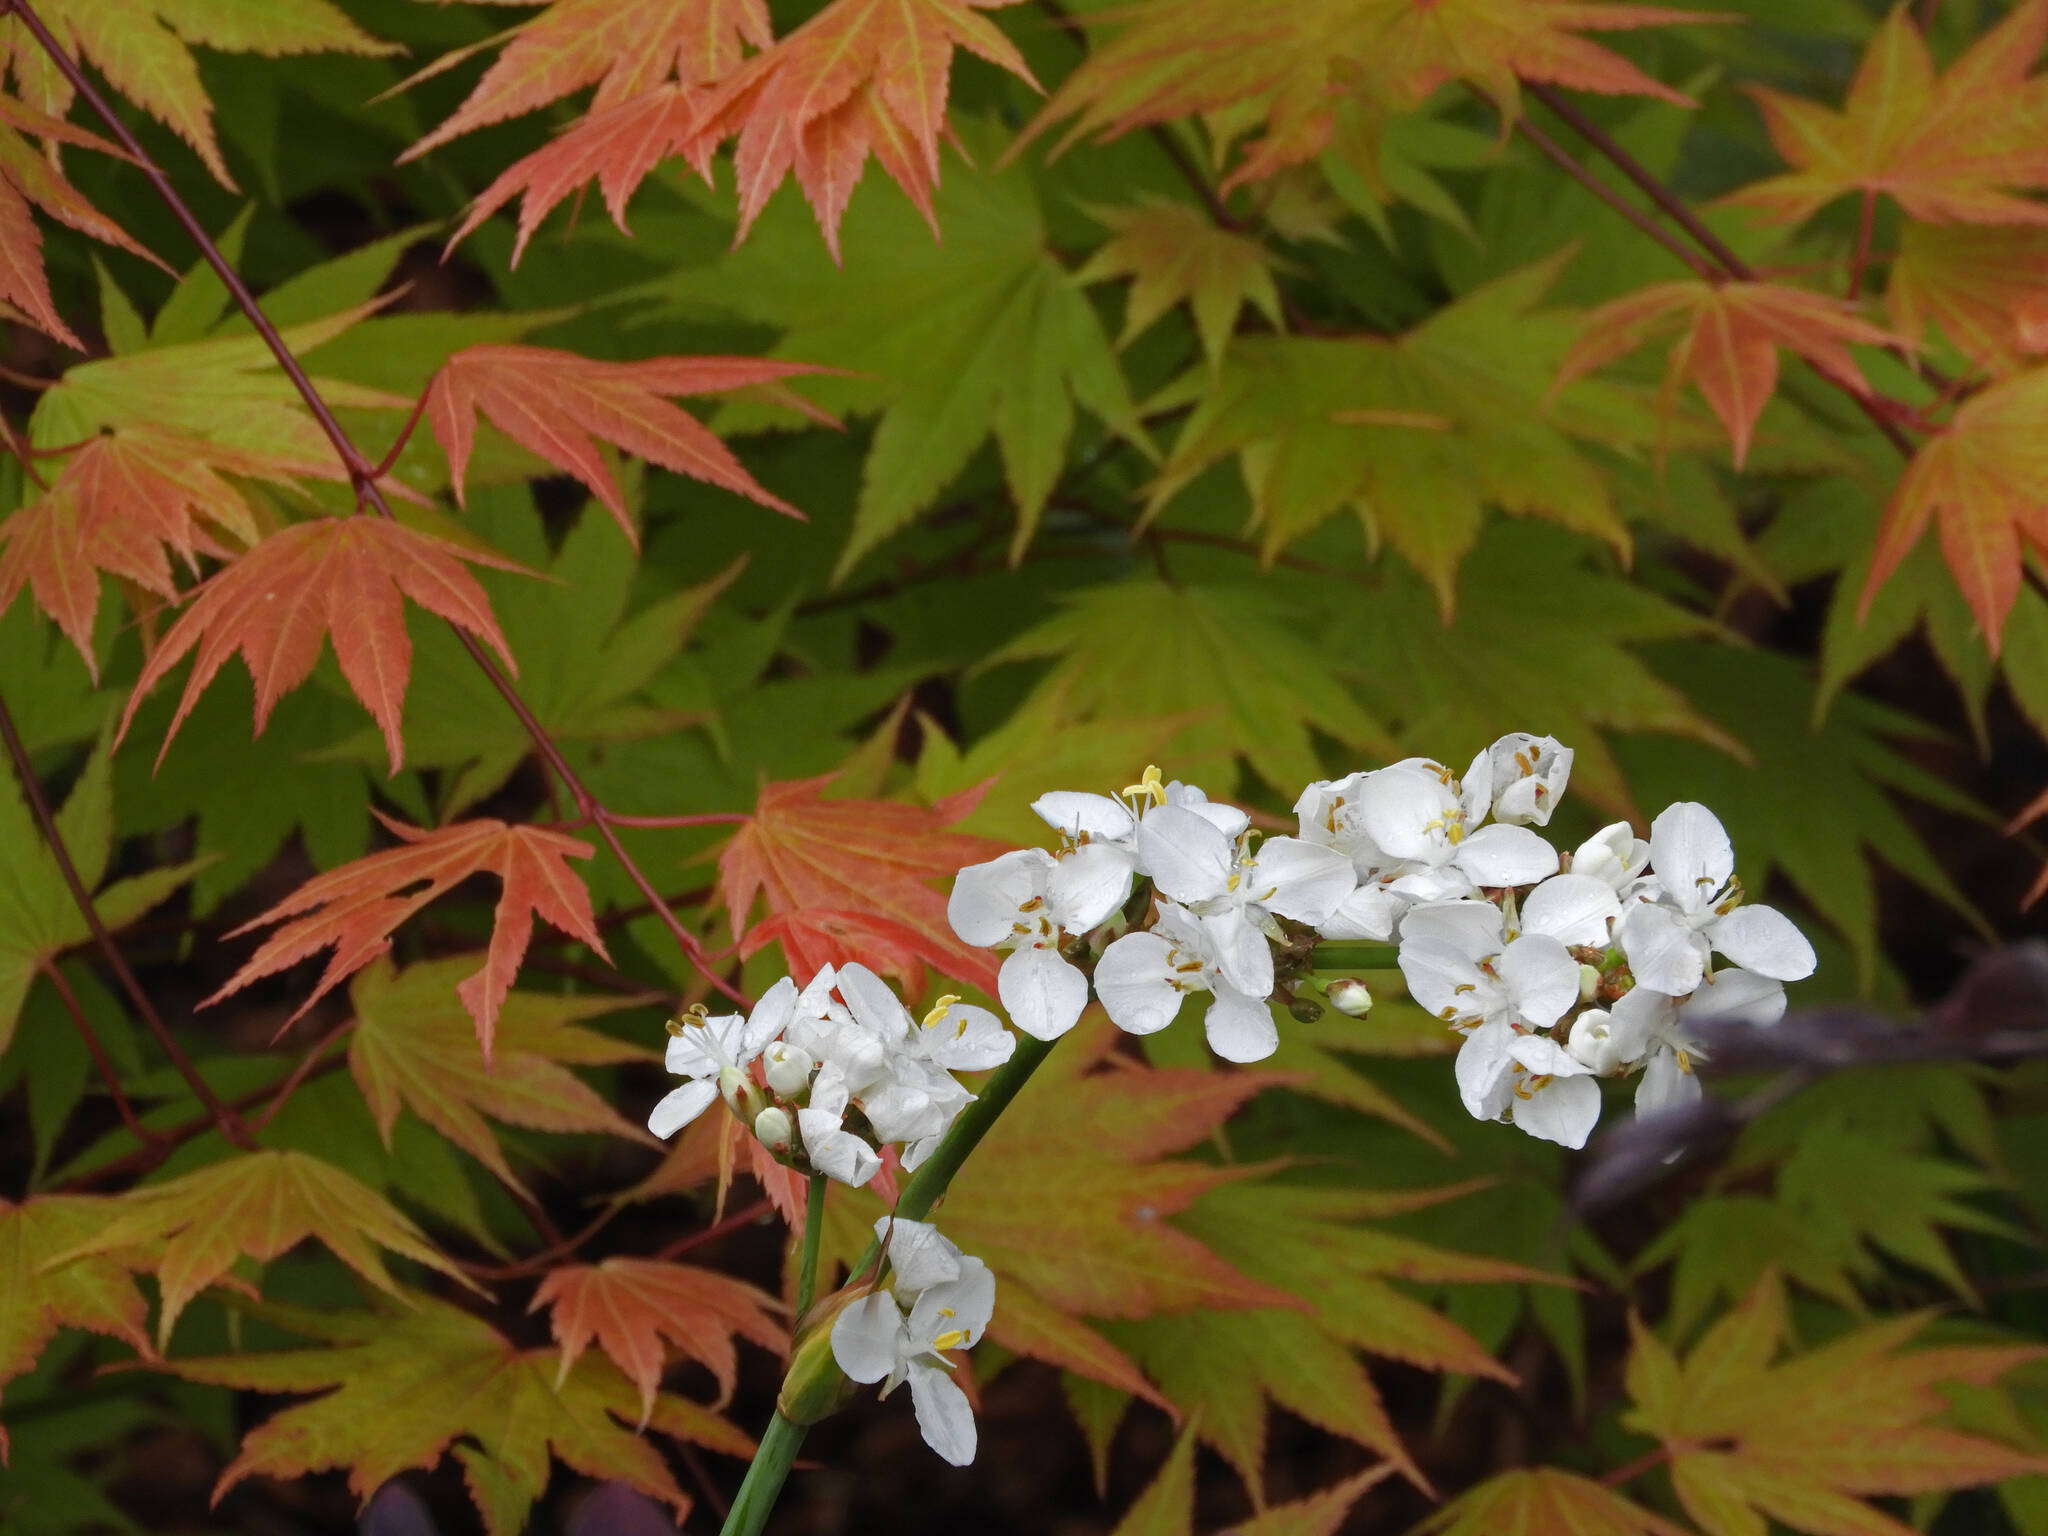 The shocking white of a New Zealand-native libertia against the burnt umber backdrop of a Japanese maple. Find out how you create your own thriving, interesting garden year-round with experts David Whiting and Jeff de Jong at the Green Thumb Education Series presentation “Forty Plants, Four Seasons” Thursday, May 11 from noon – 1 p.m. at the Port Angeles Library. Photo by David Whiting